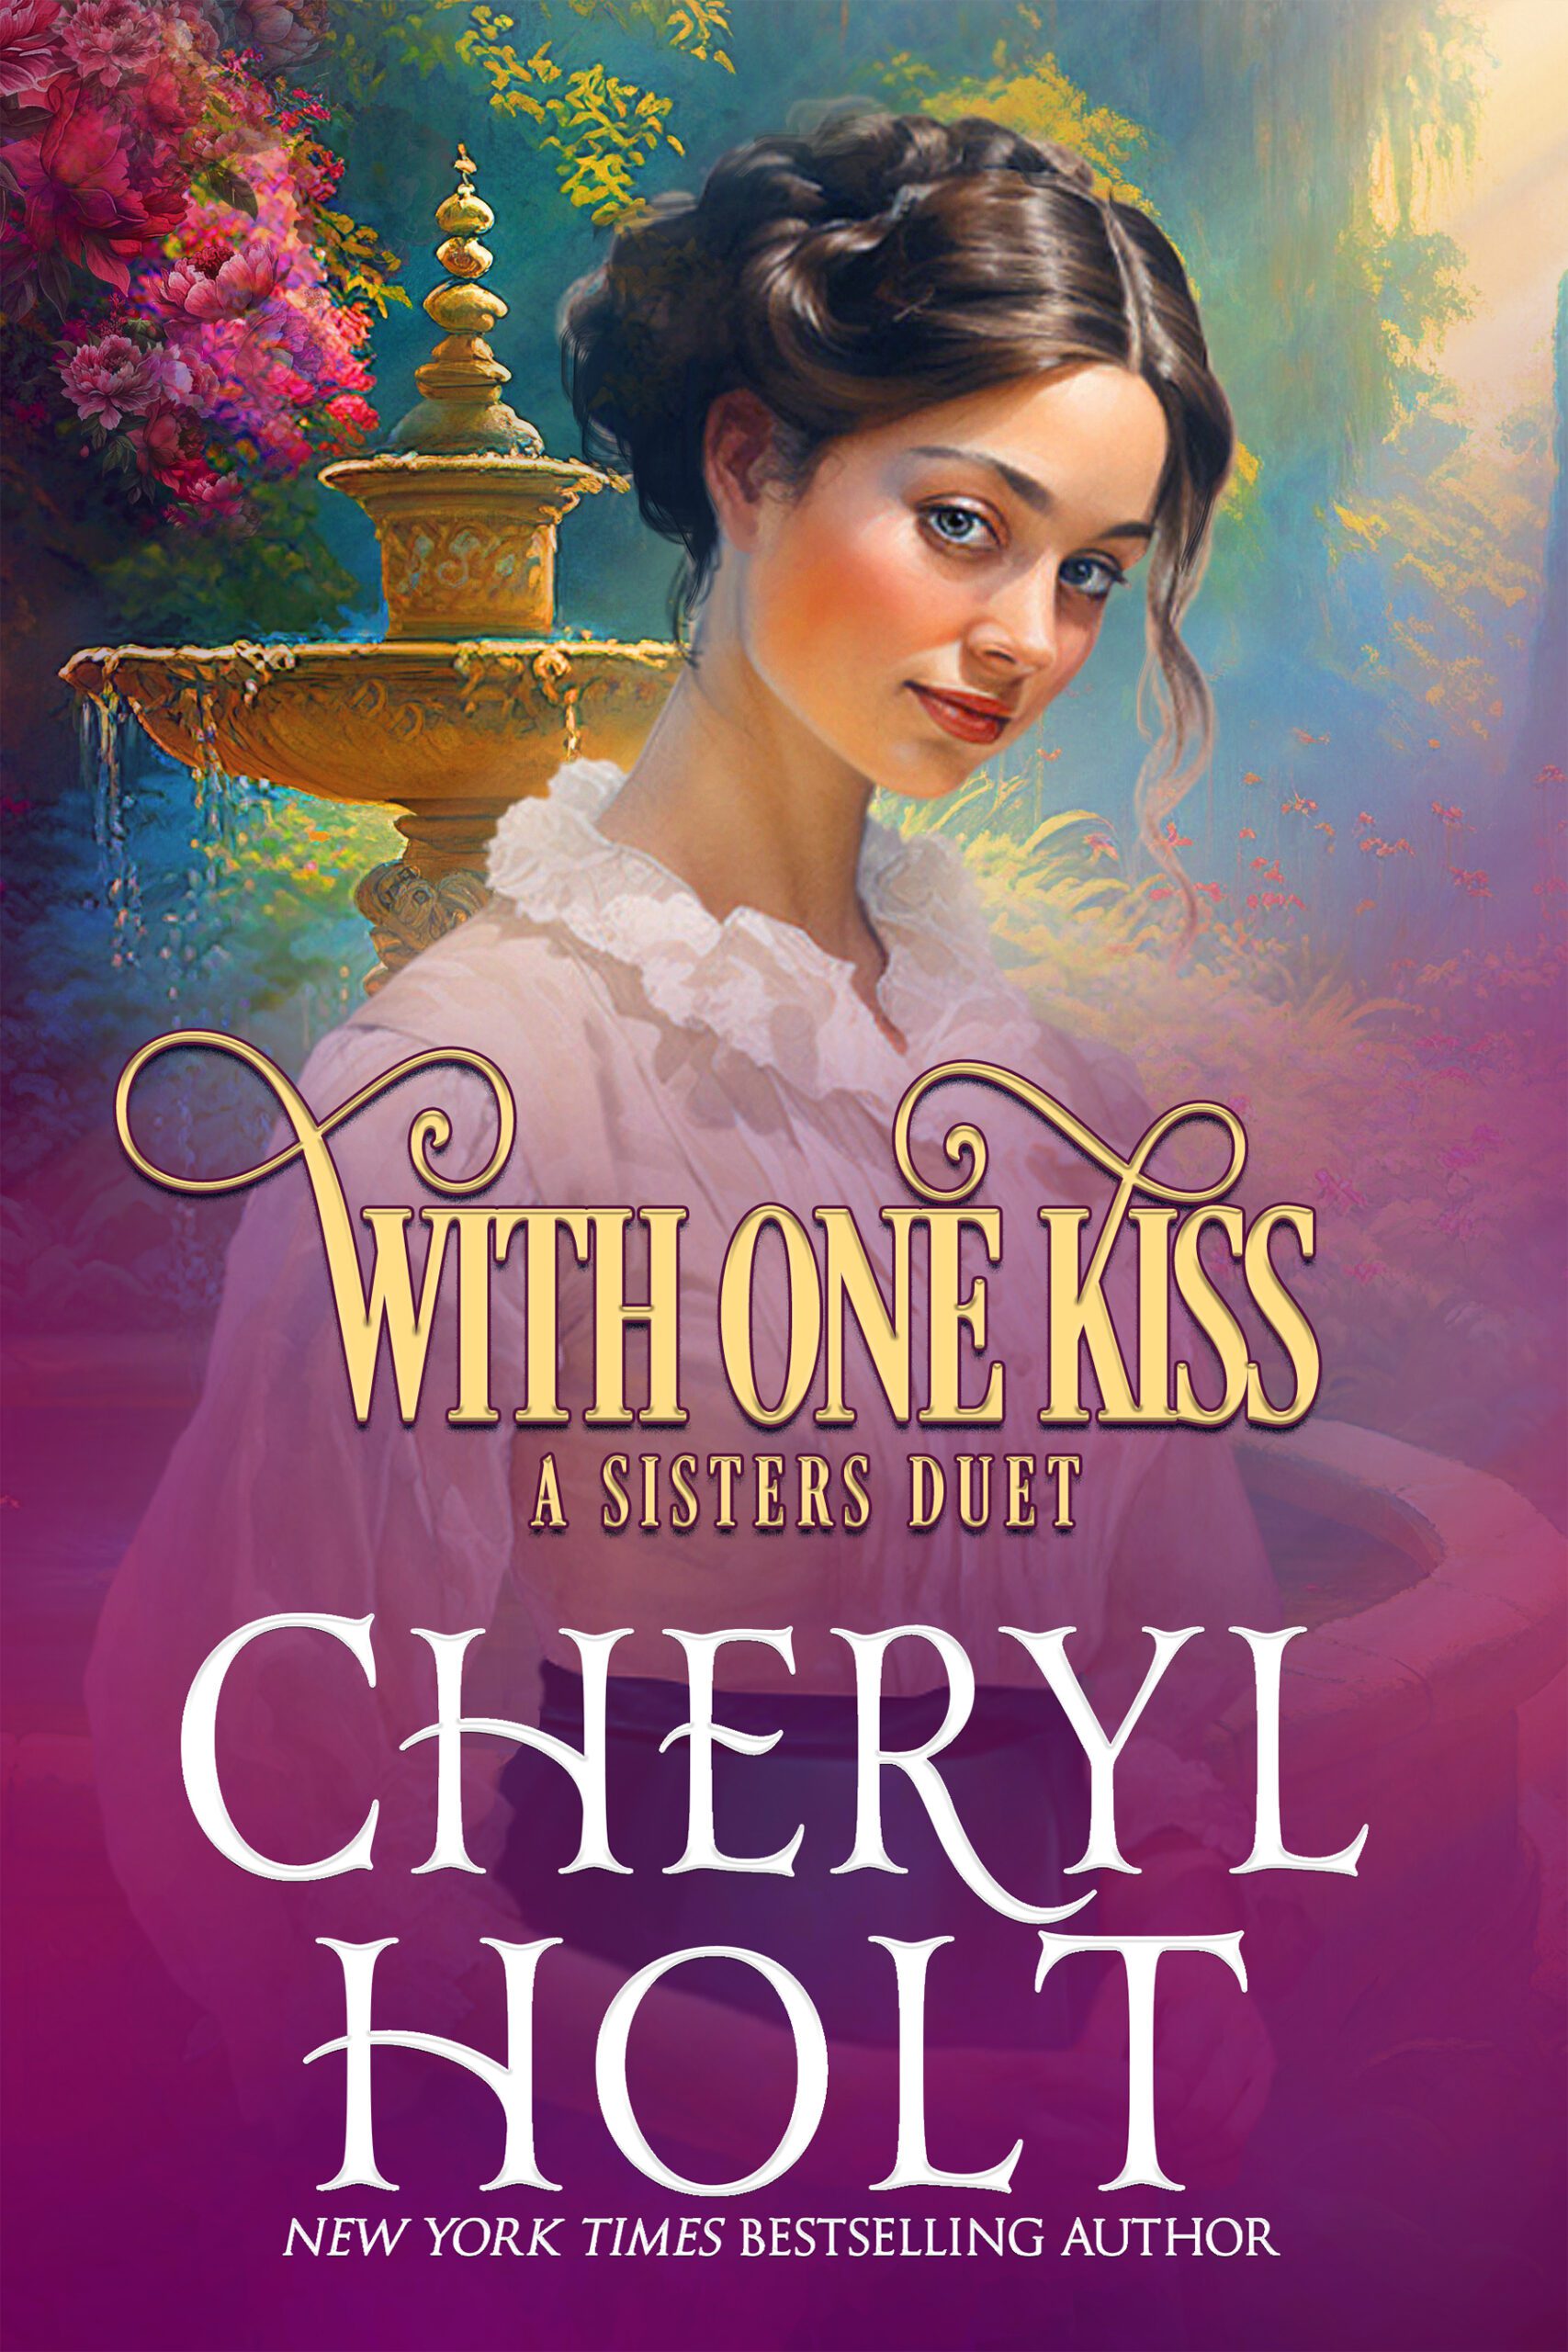 WITH ONE KISS by Cheryl Holt